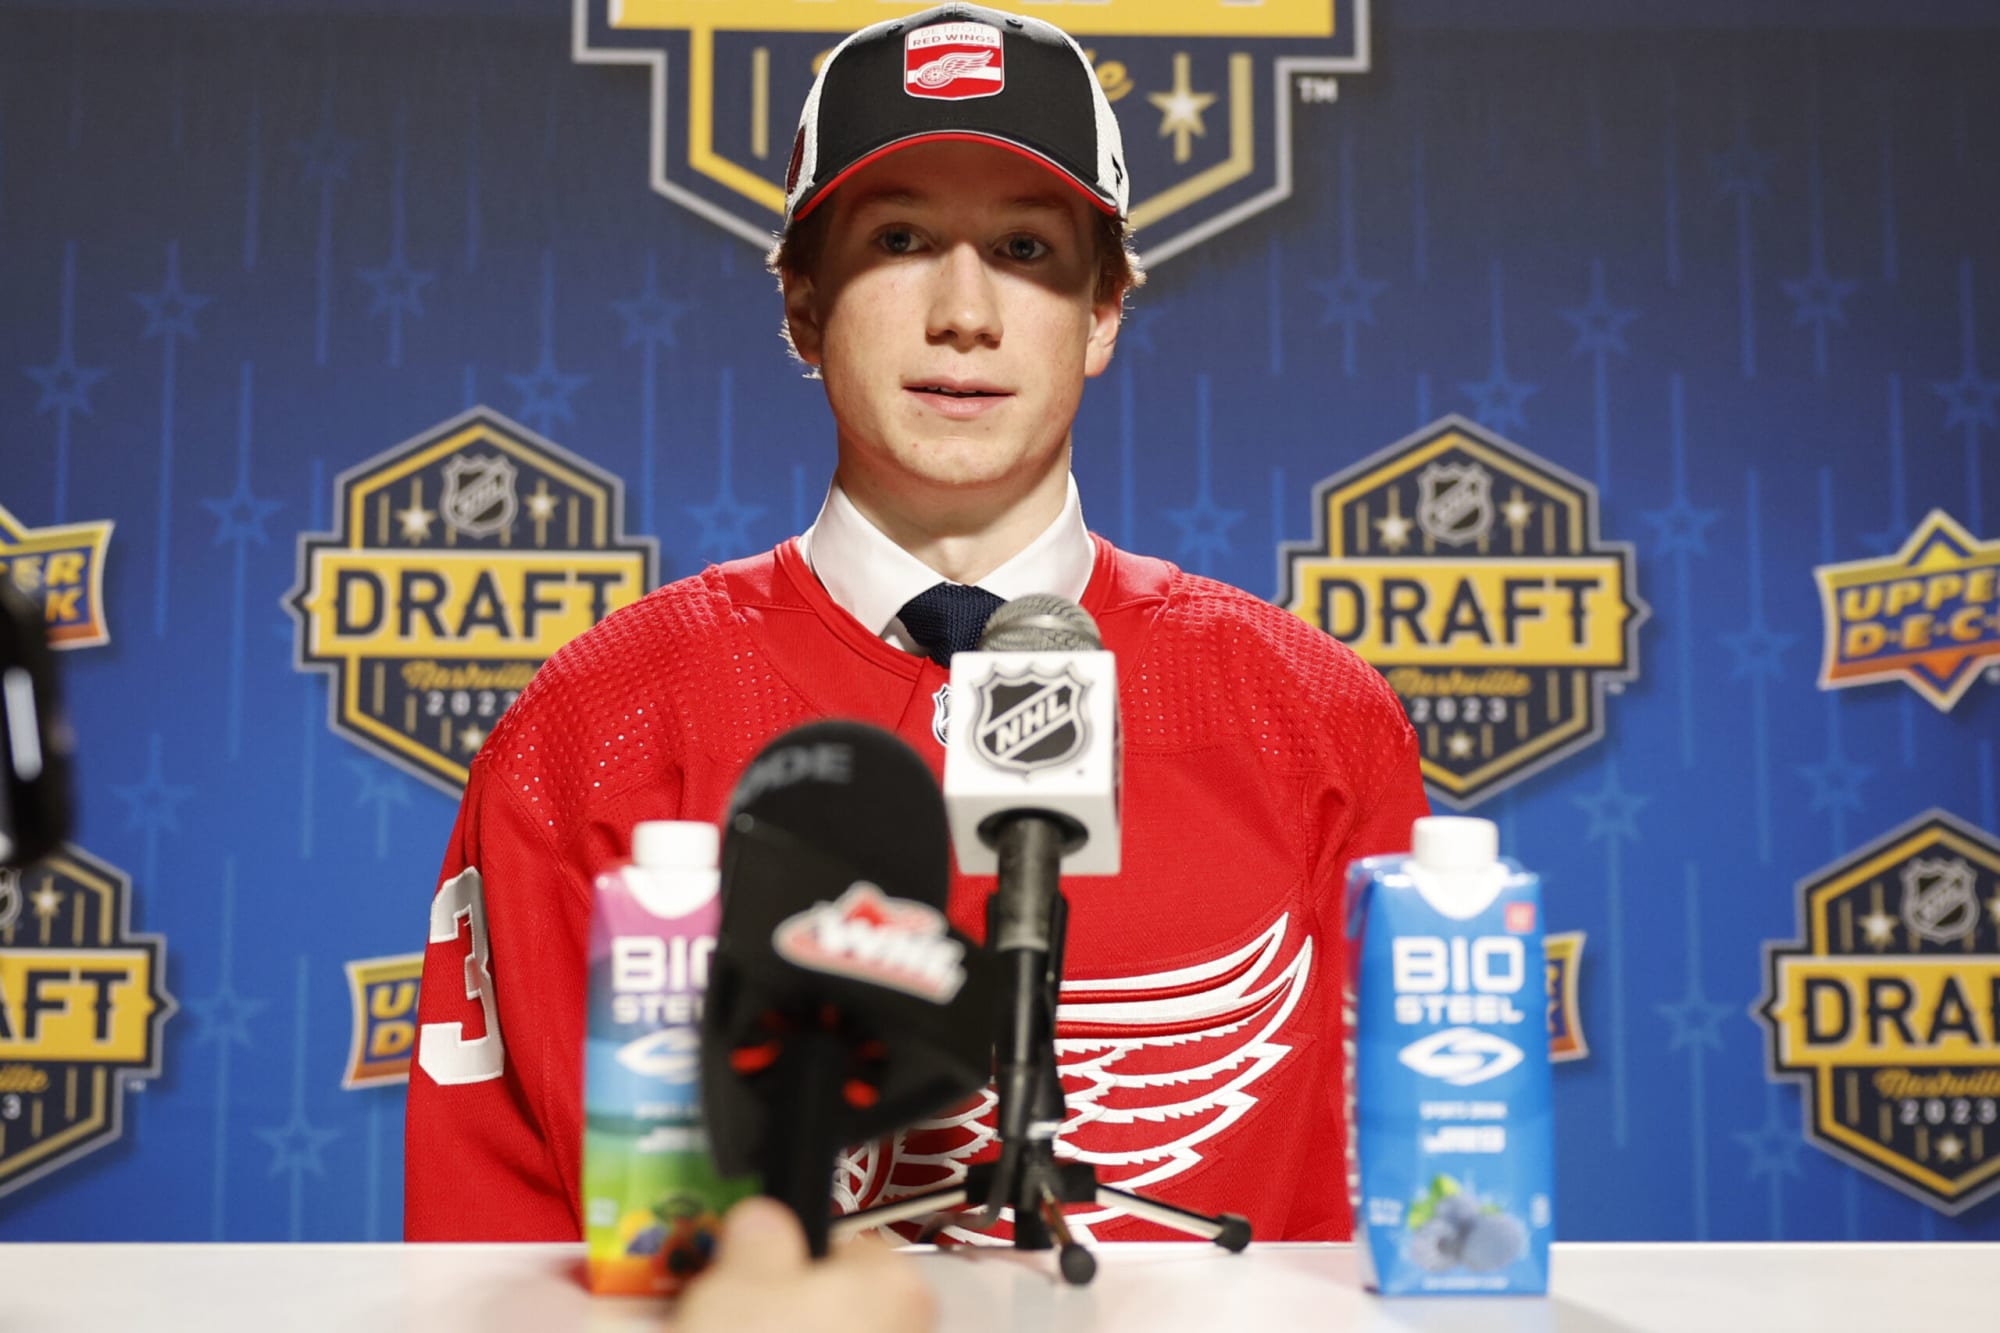 What’s next for the 2023 NHL Draft class of the Detroit Red Wings